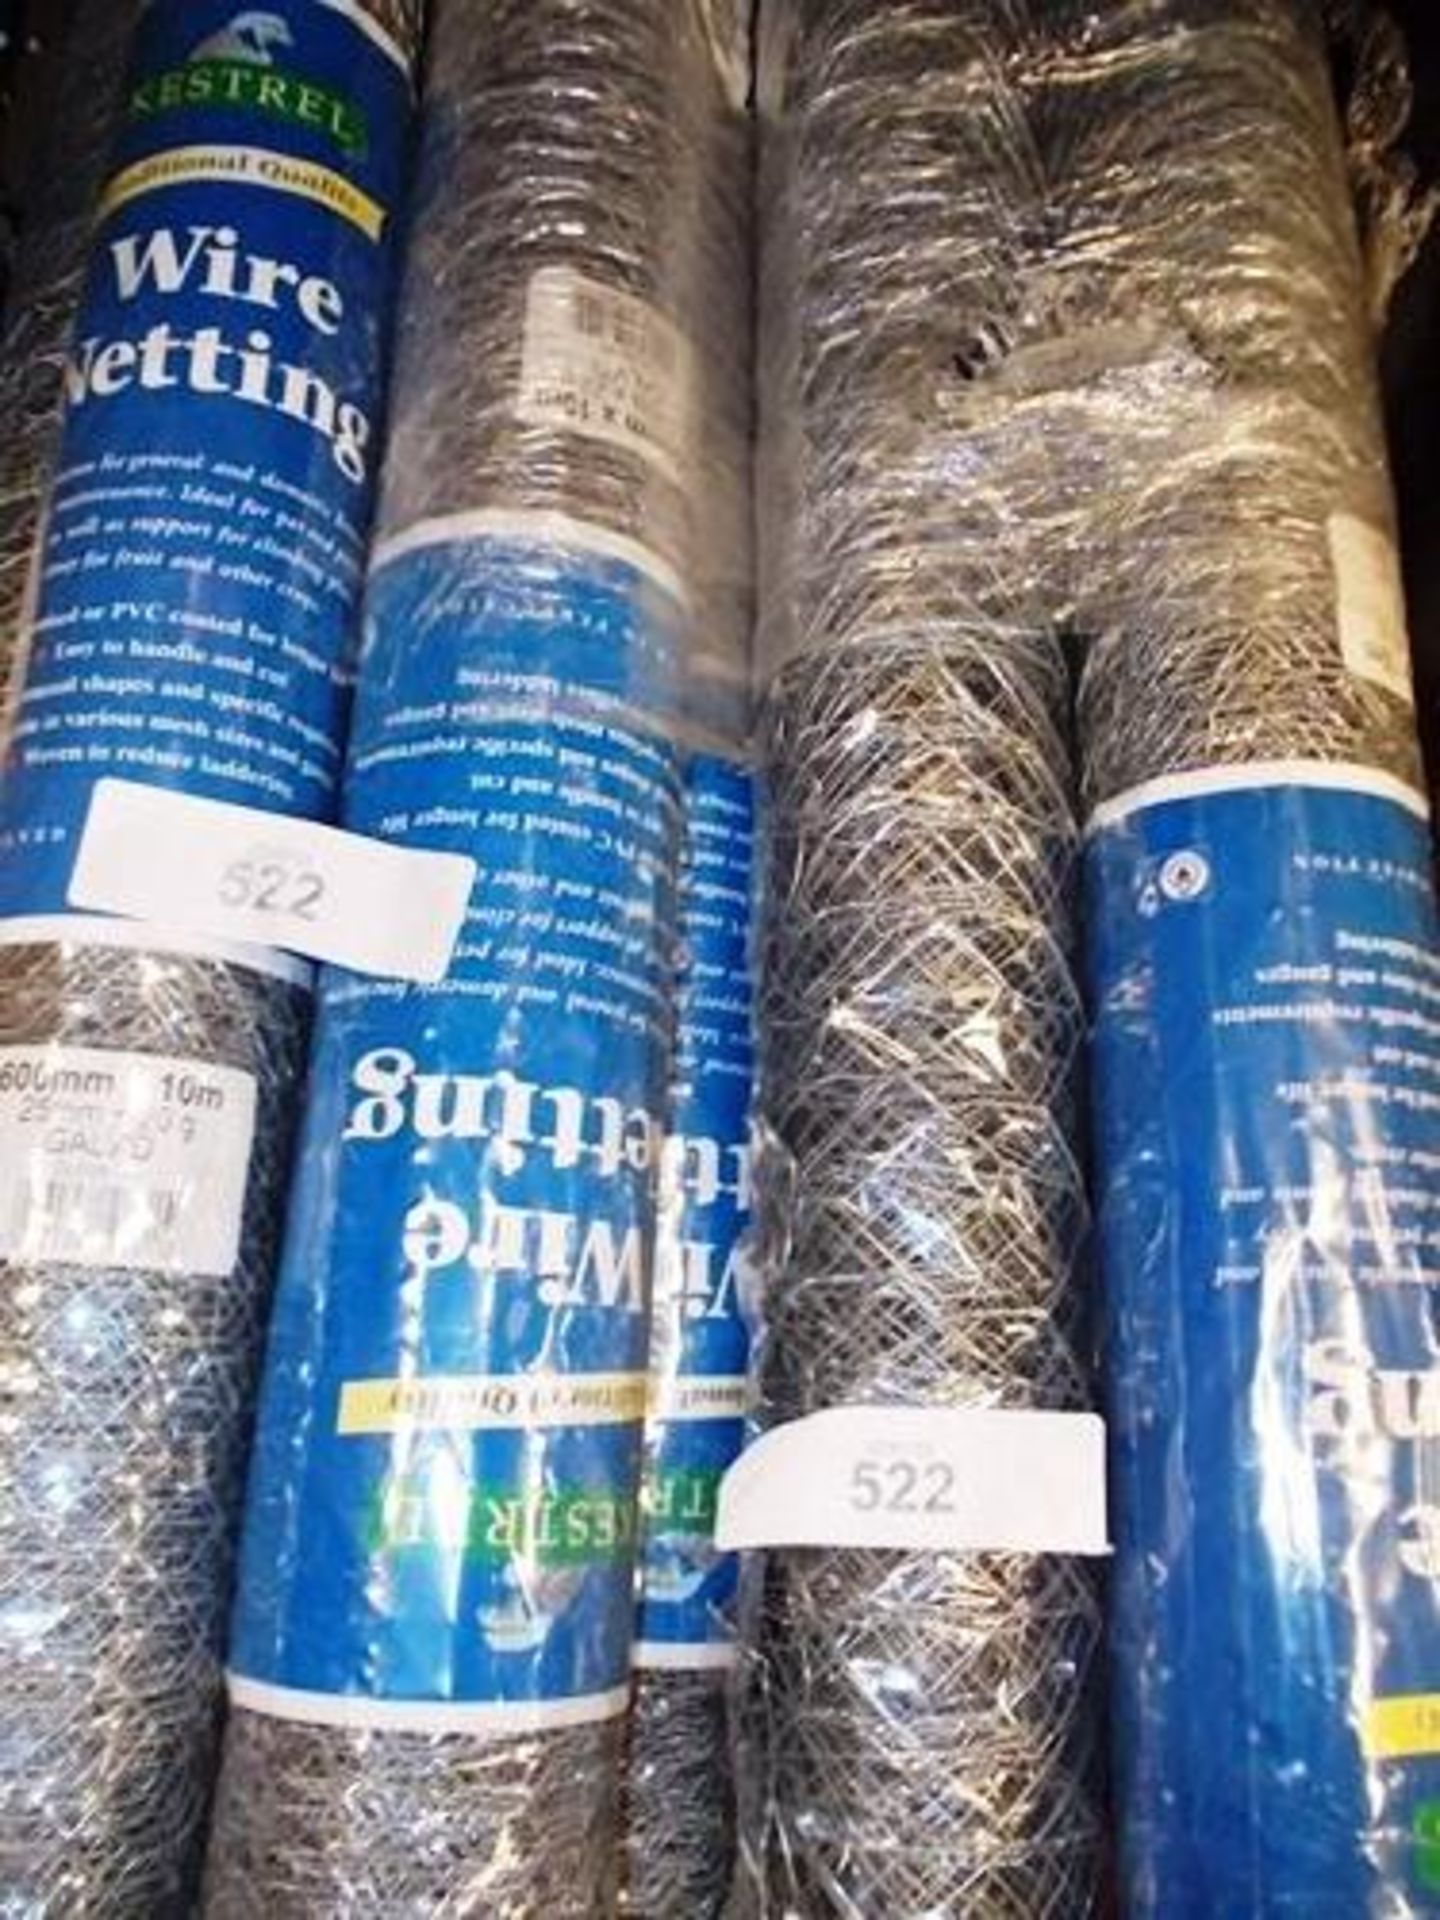 7 x rolls of Kestrel traditional wire netting, size 600mm x 10m (ES11) - Image 2 of 3